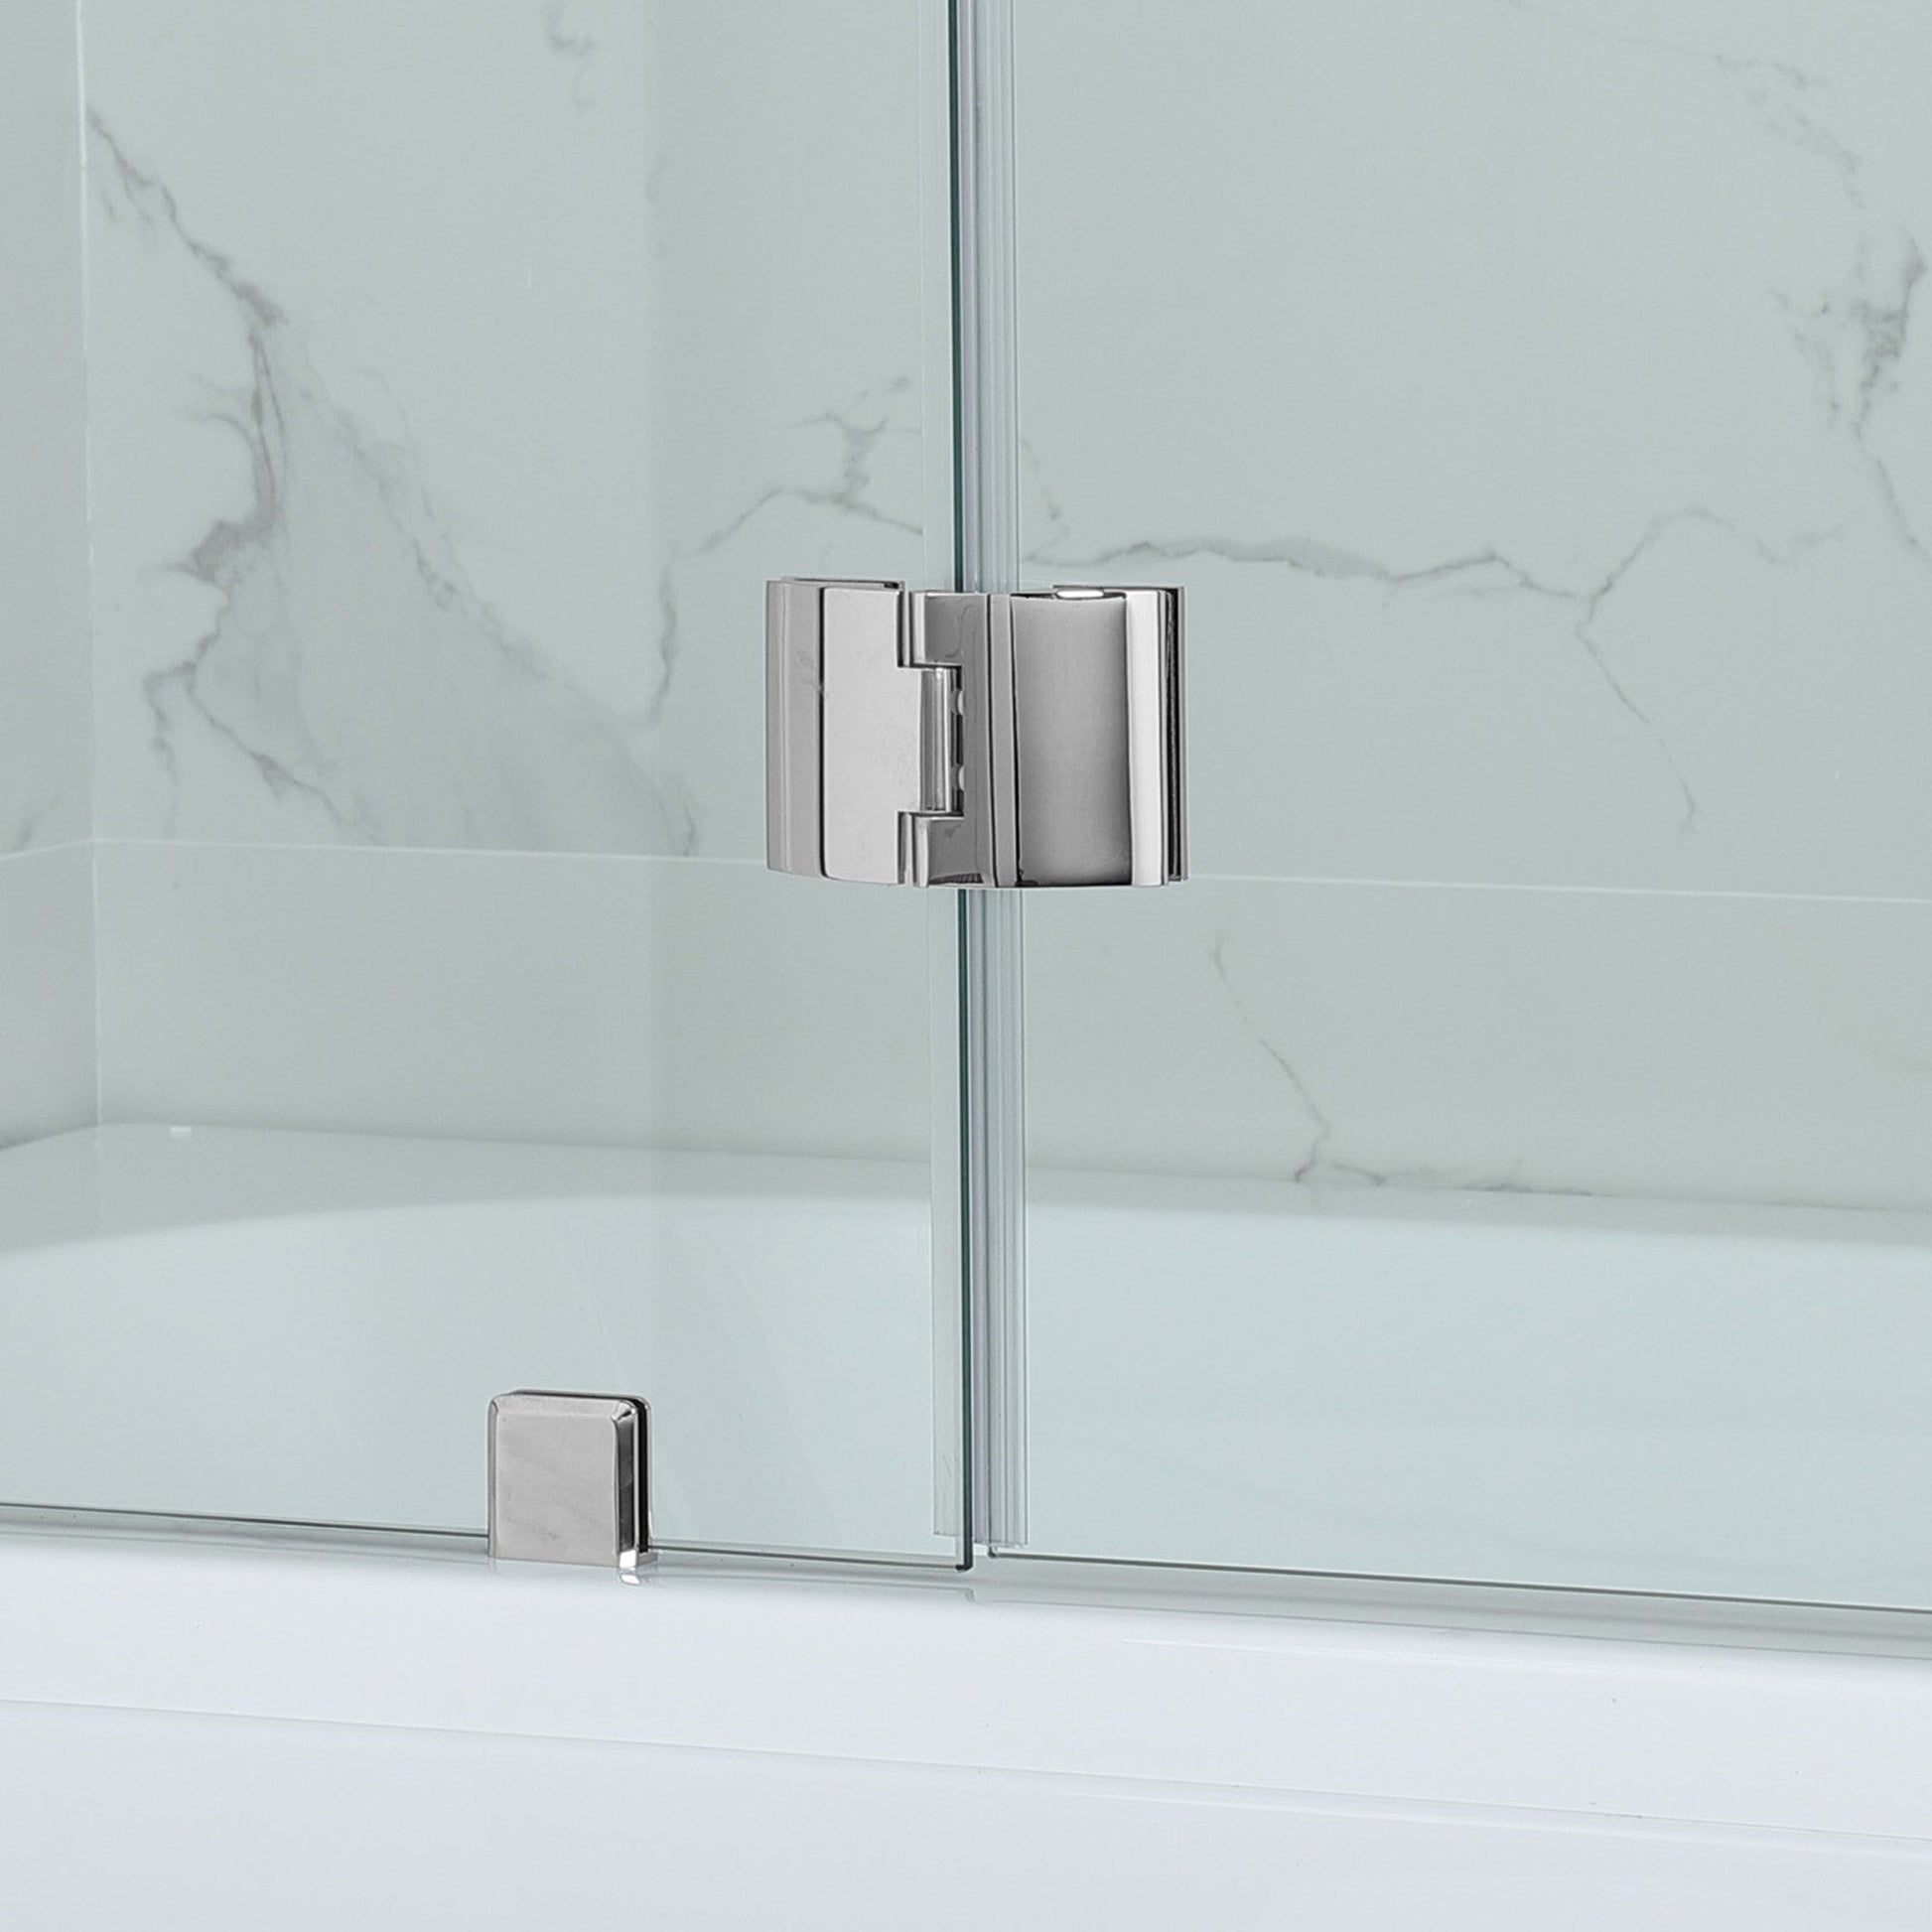 WoodBridge 49" W x 58" H Clear Tempered Glass Frameless Hinged Shower Tub Door With Brushed Nickel Support Bar and Hardware